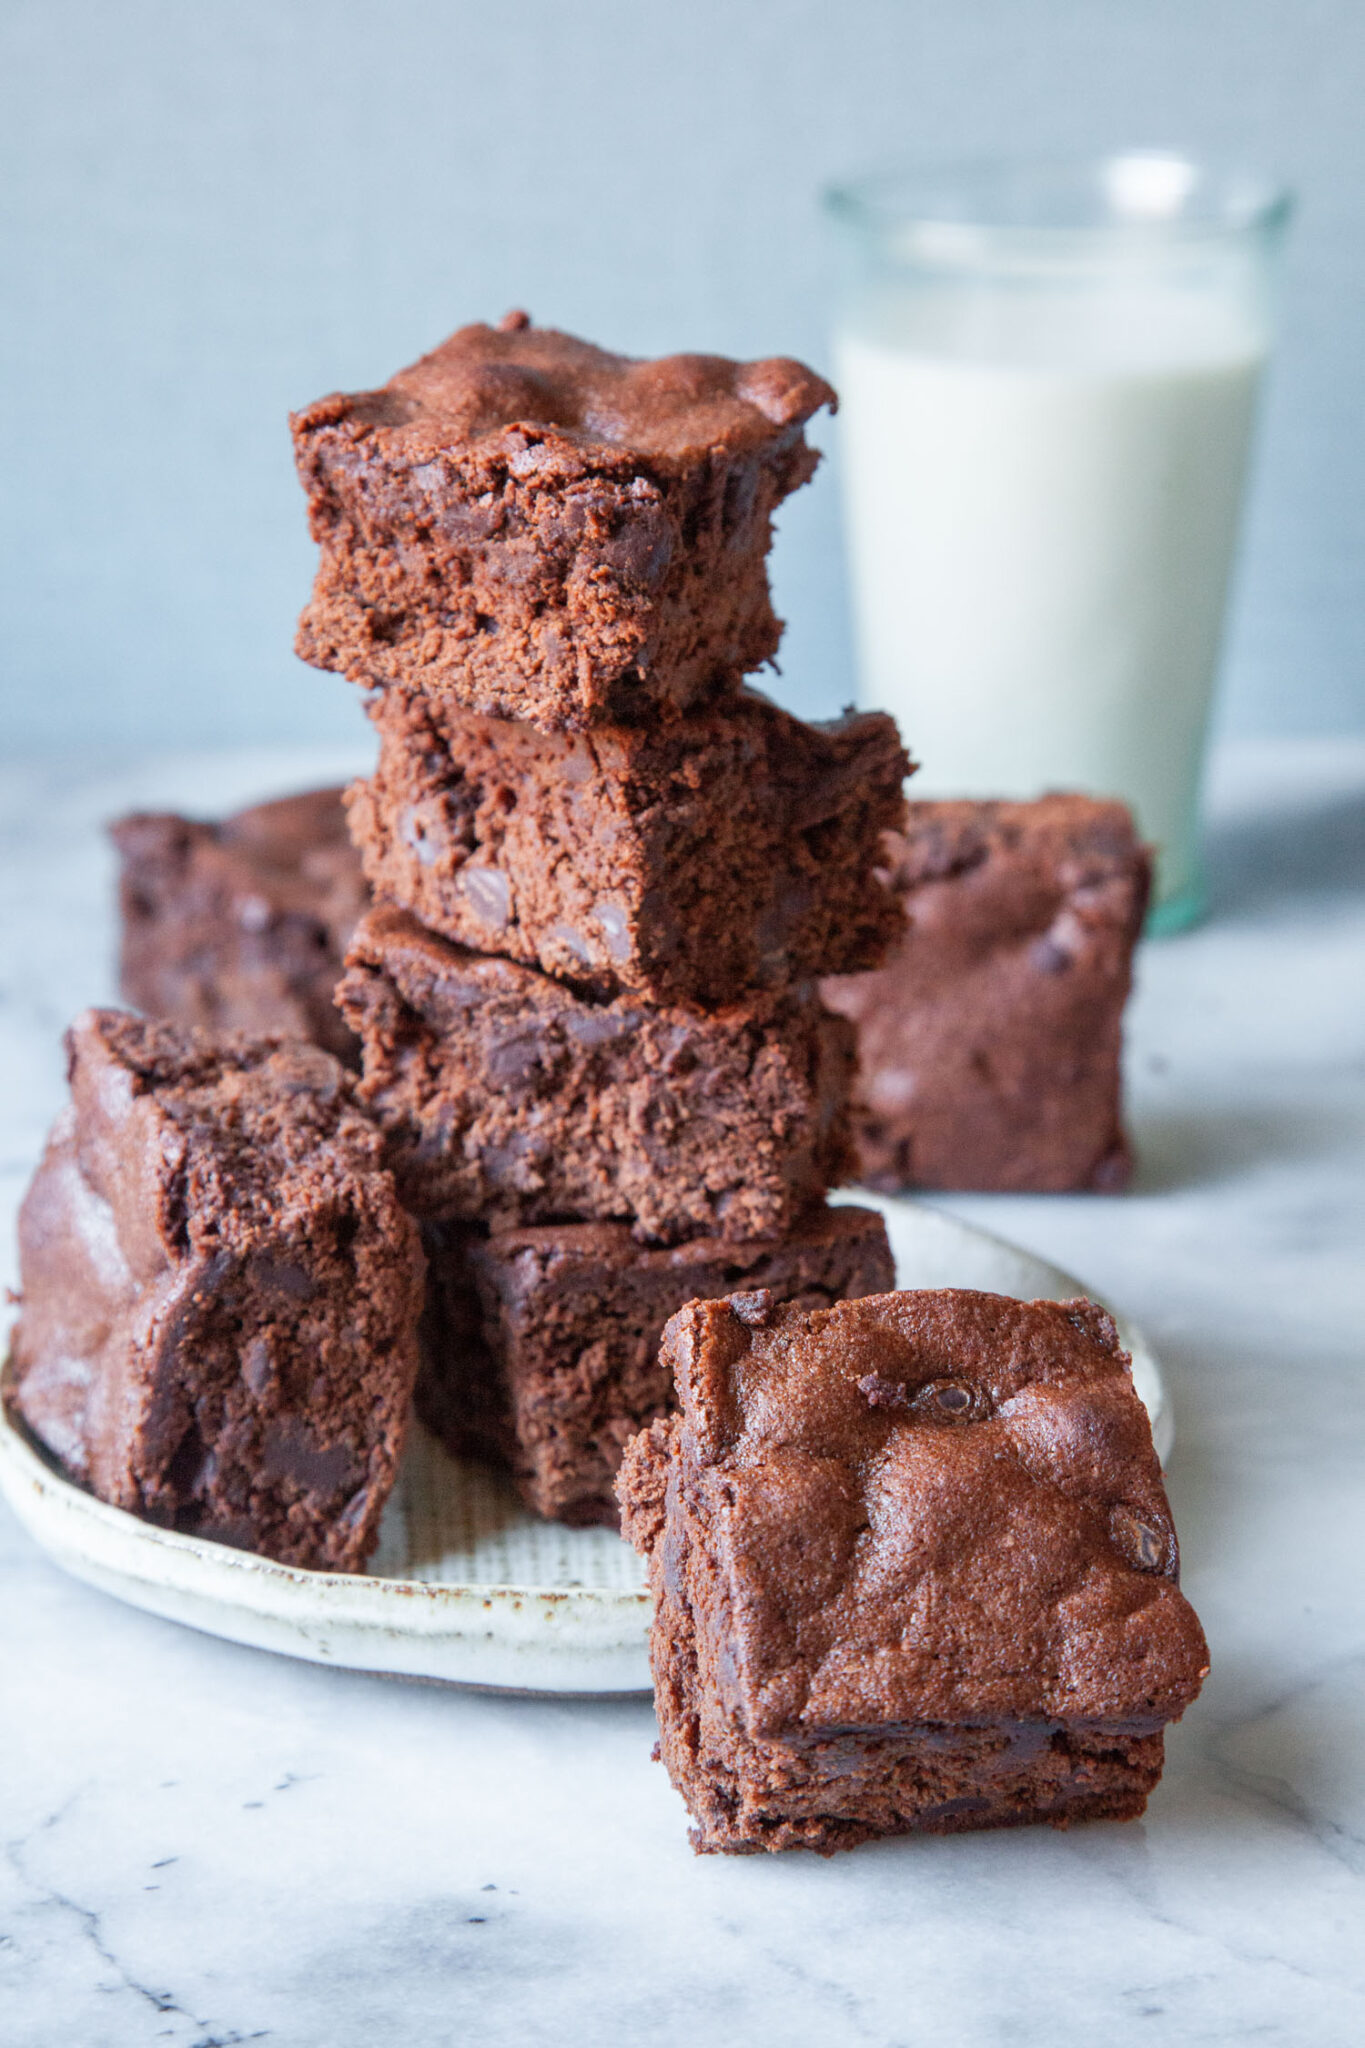 A stack of cakey brownies on a plate with one brownie tilted and sitting off the plate on the table. A glass of milk is behind the stack of brownies.